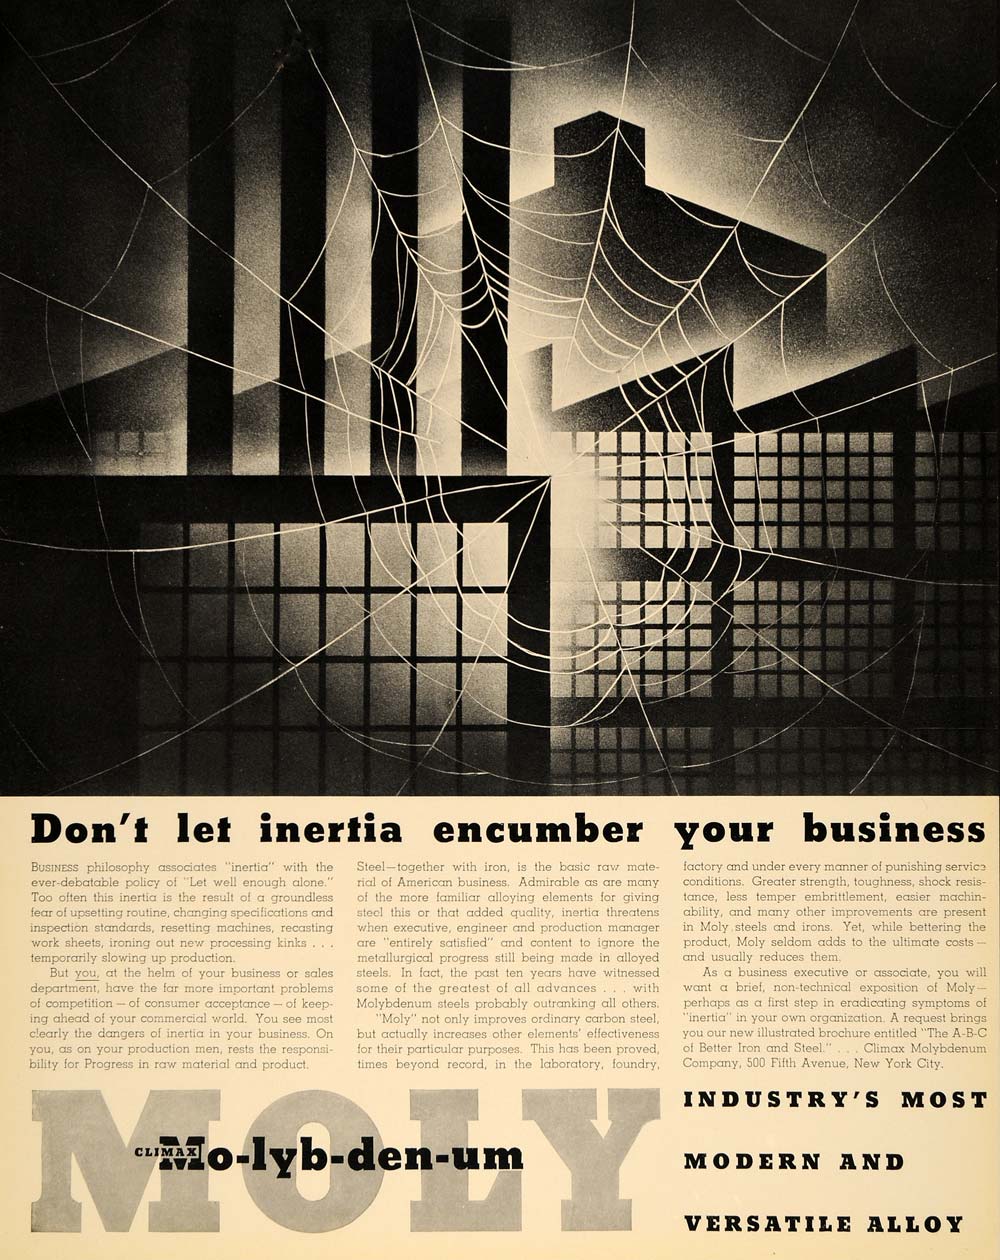 1935 Ad Climax Mo-lyb-den-um Industry Alloy Steel Iron - ORIGINAL F6A